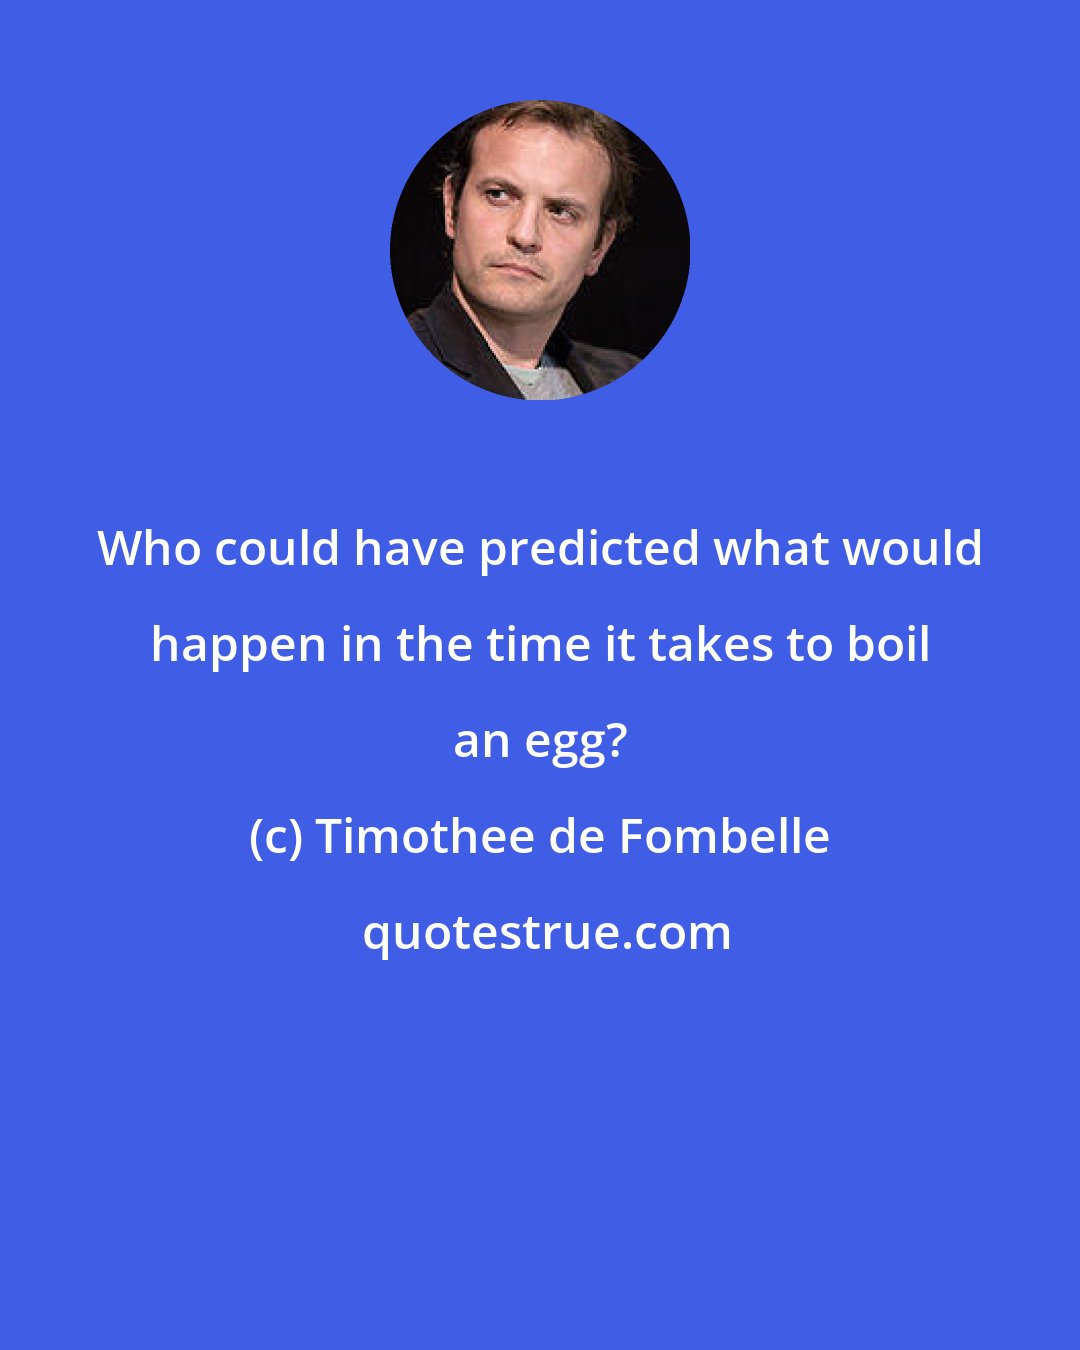 Timothee de Fombelle: Who could have predicted what would happen in the time it takes to boil an egg?